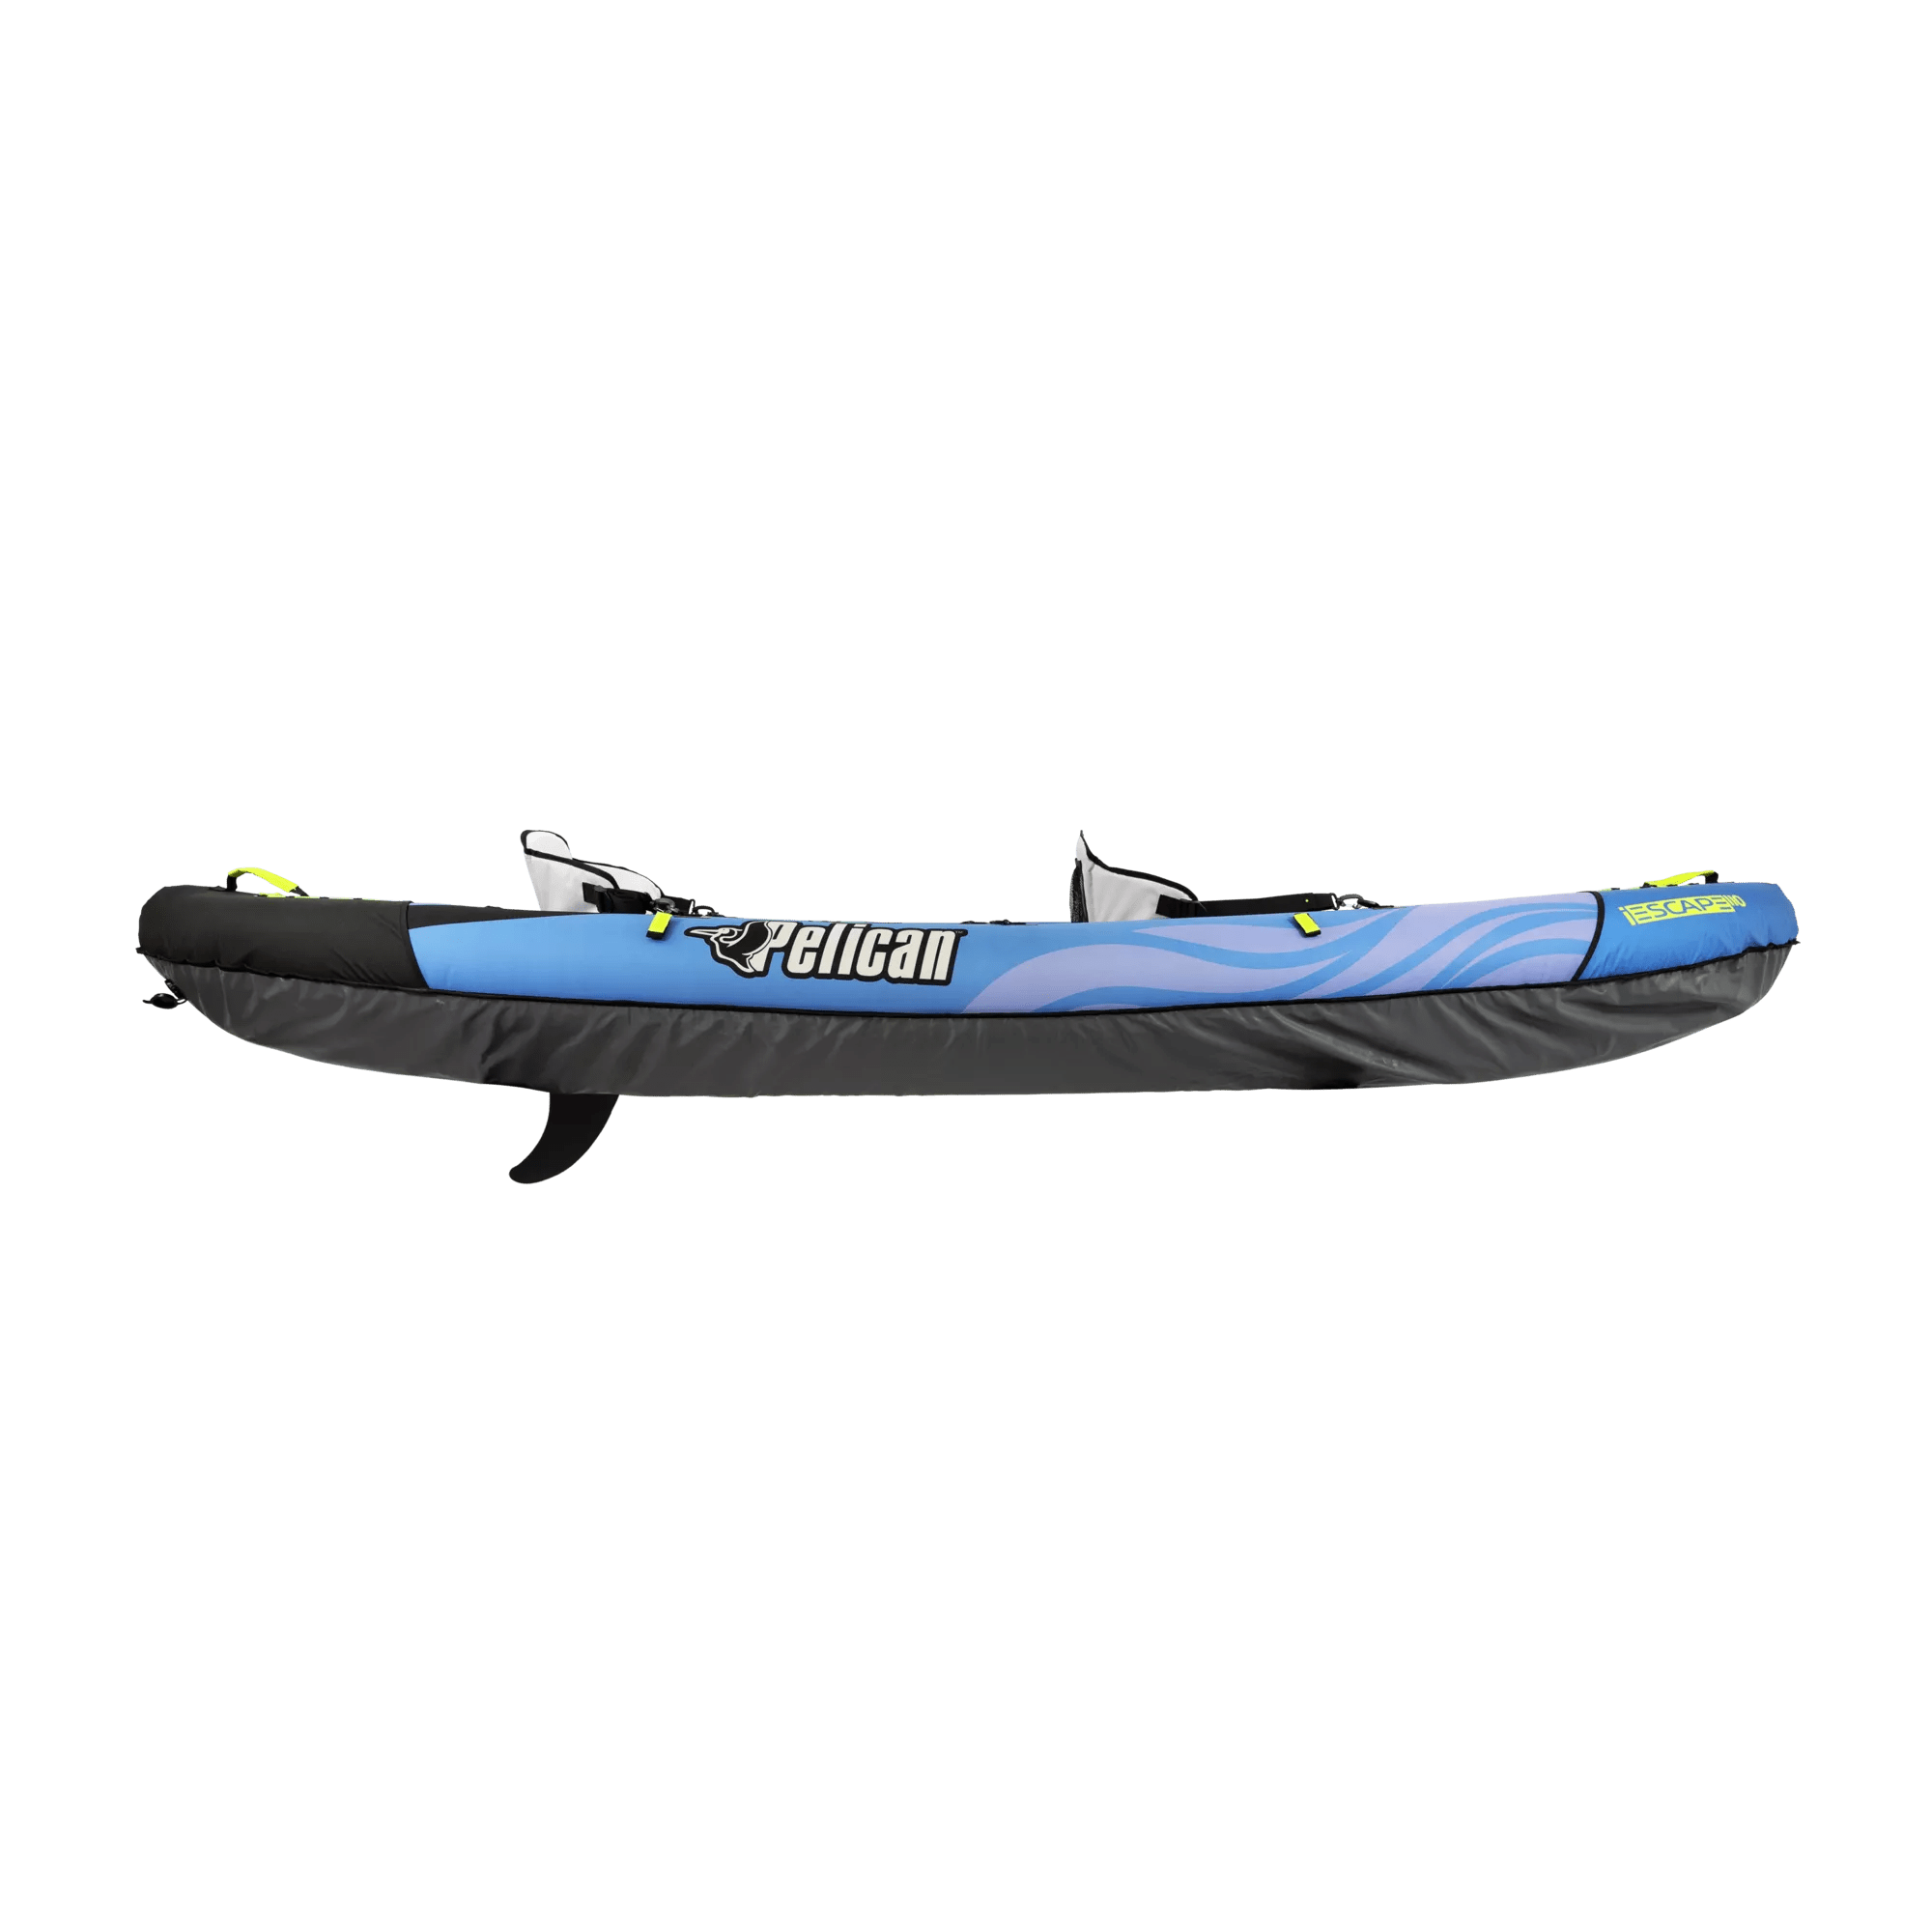 PELICAN - Convertible Inflatable Tandem Kayak iESCAPE 110 - Blue - MMG11P104 - SIDE